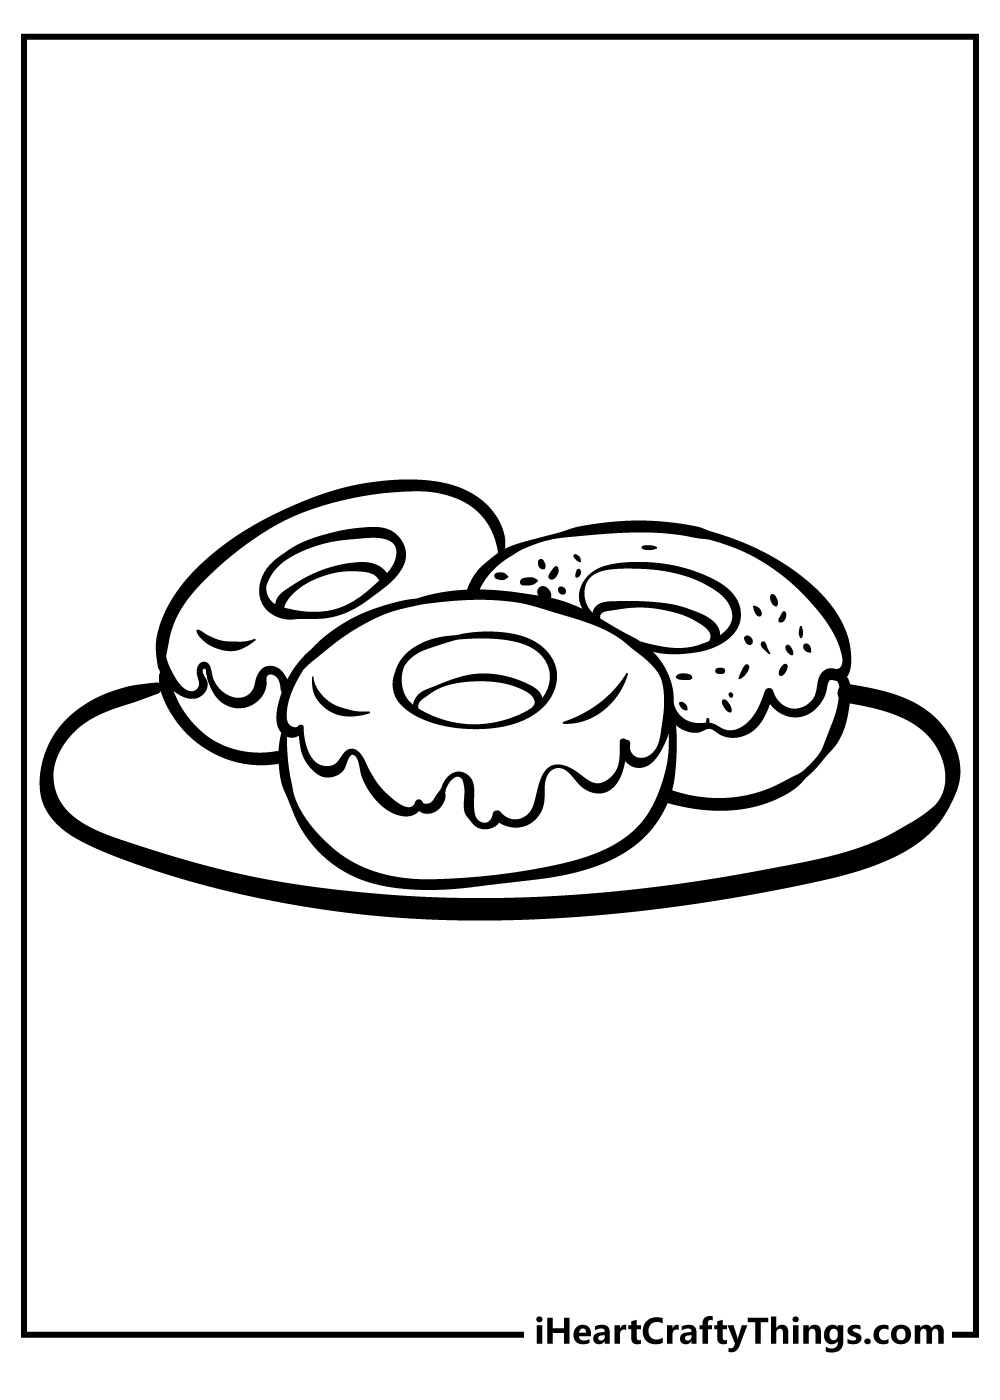 Donut Coloring Book free printable